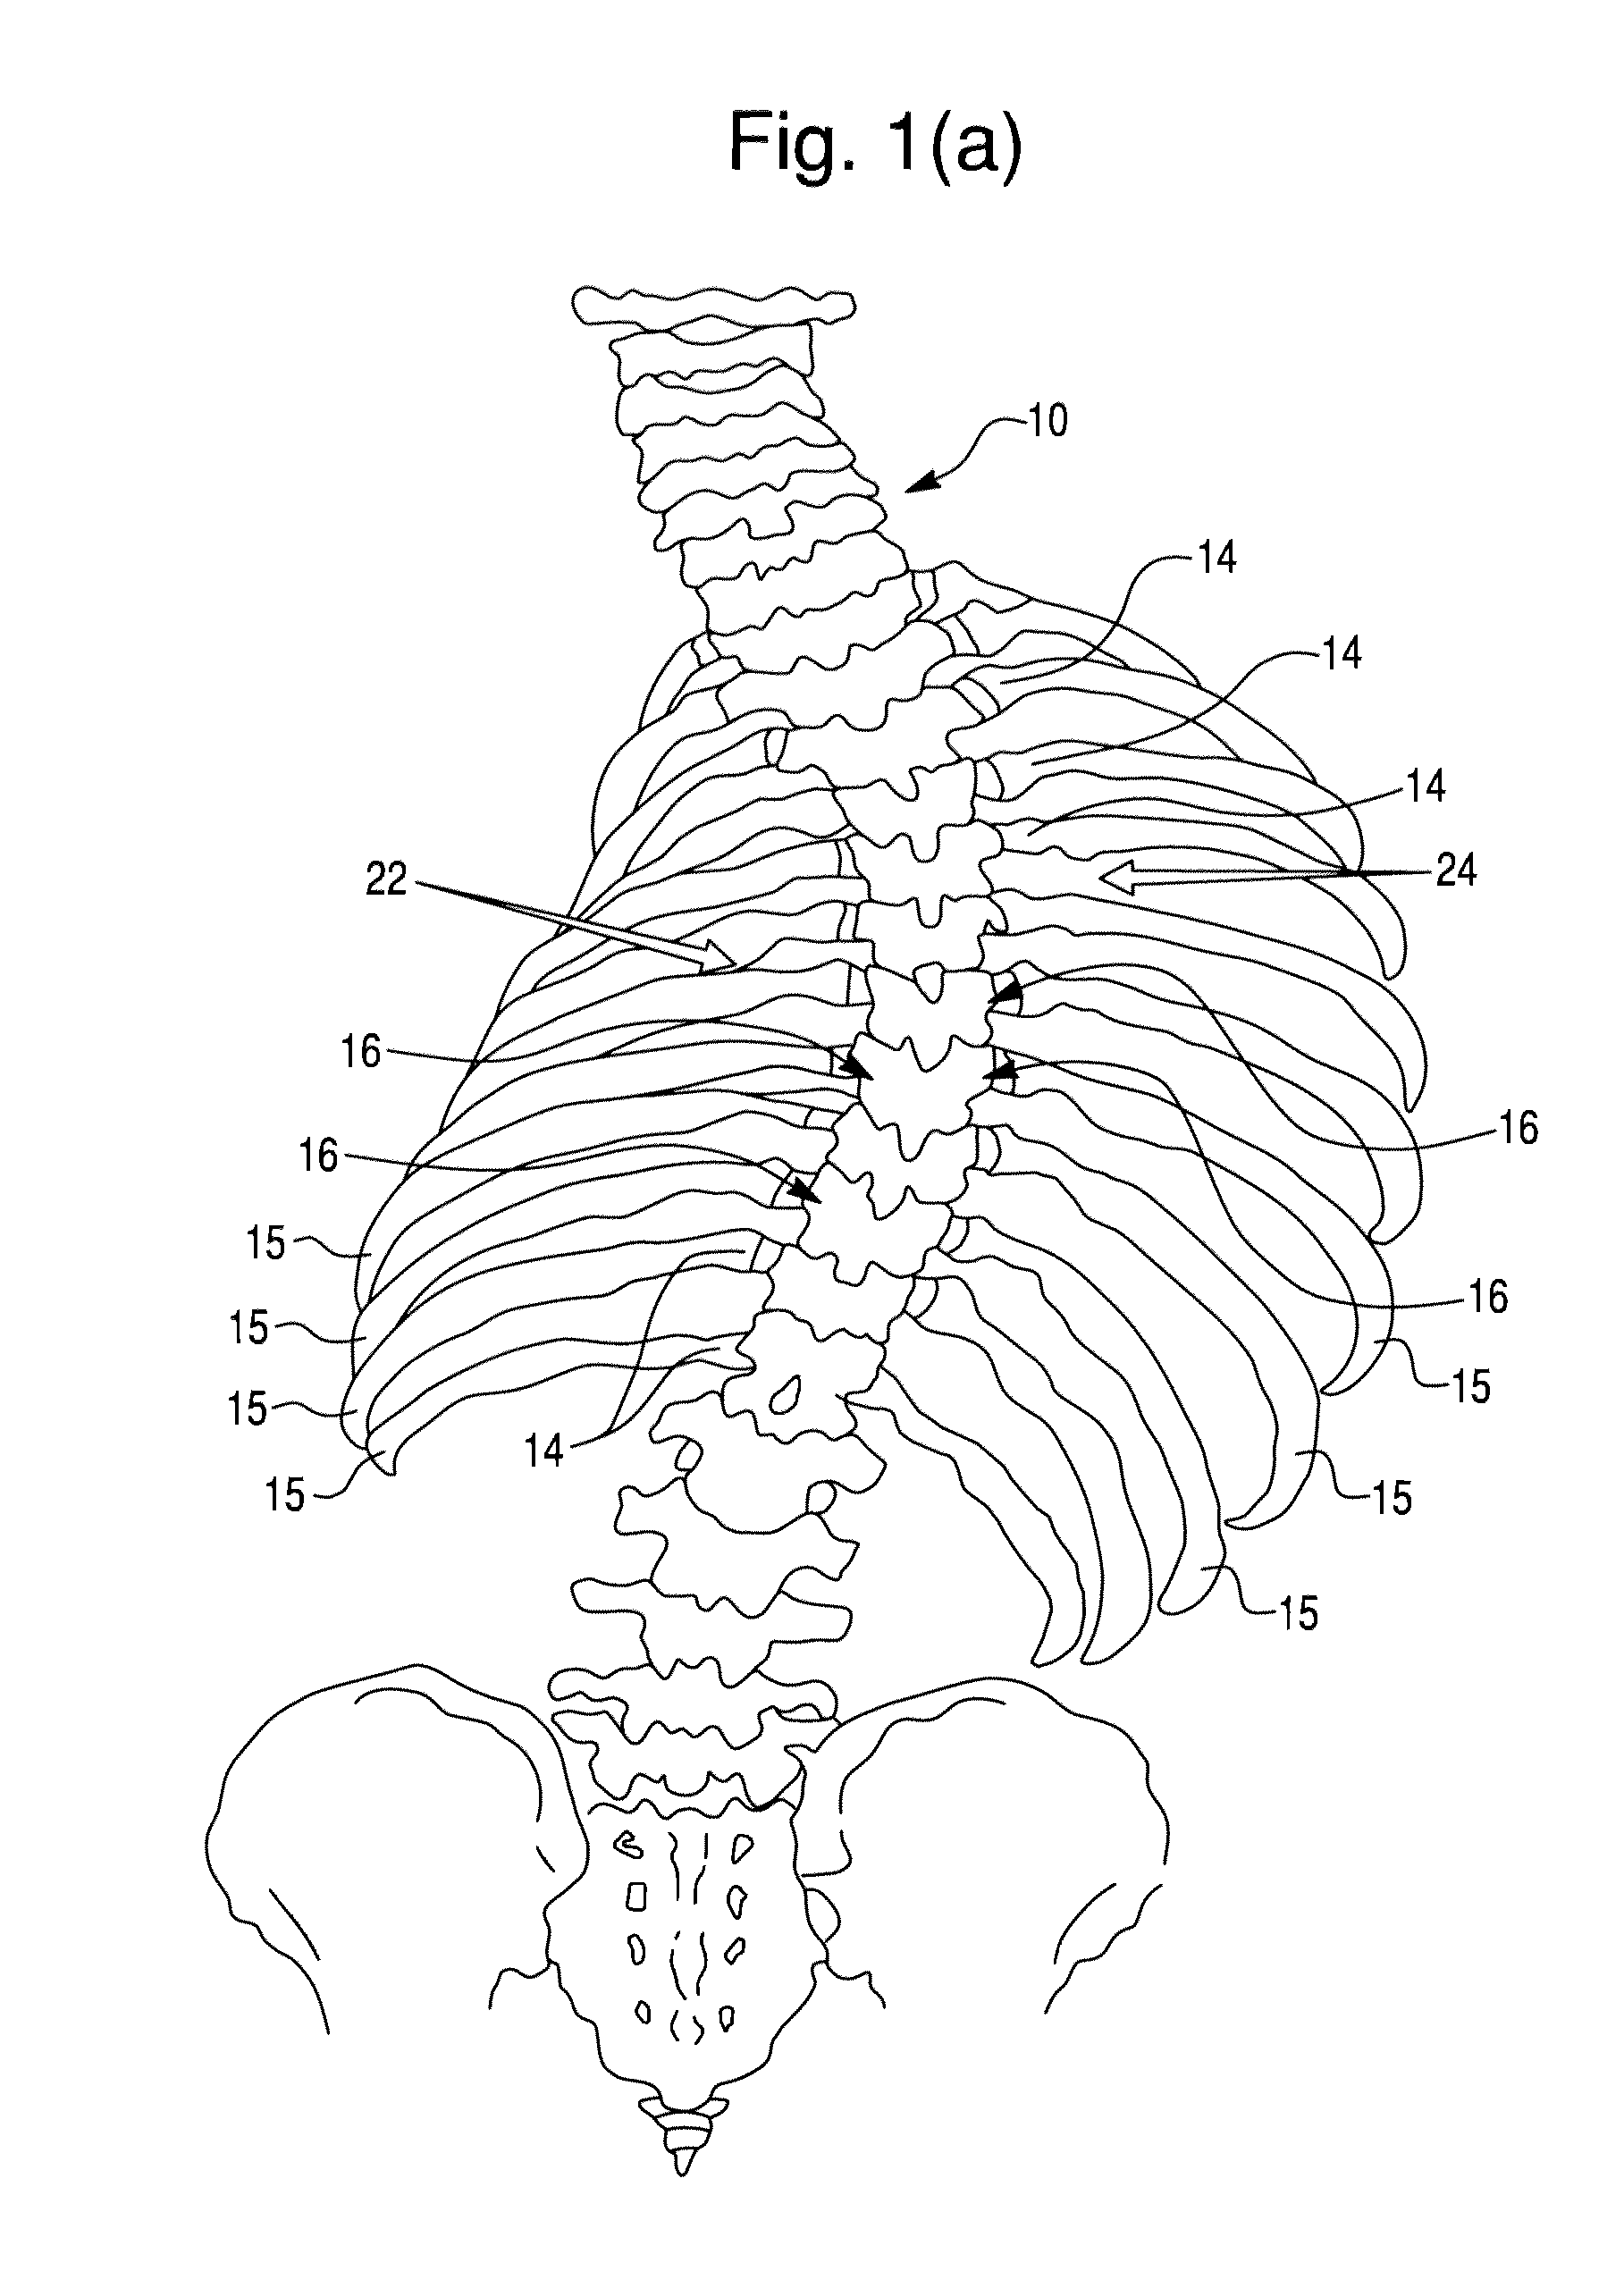 Segmental orthopedic device for spinal elongation and for treatment of scoliosis